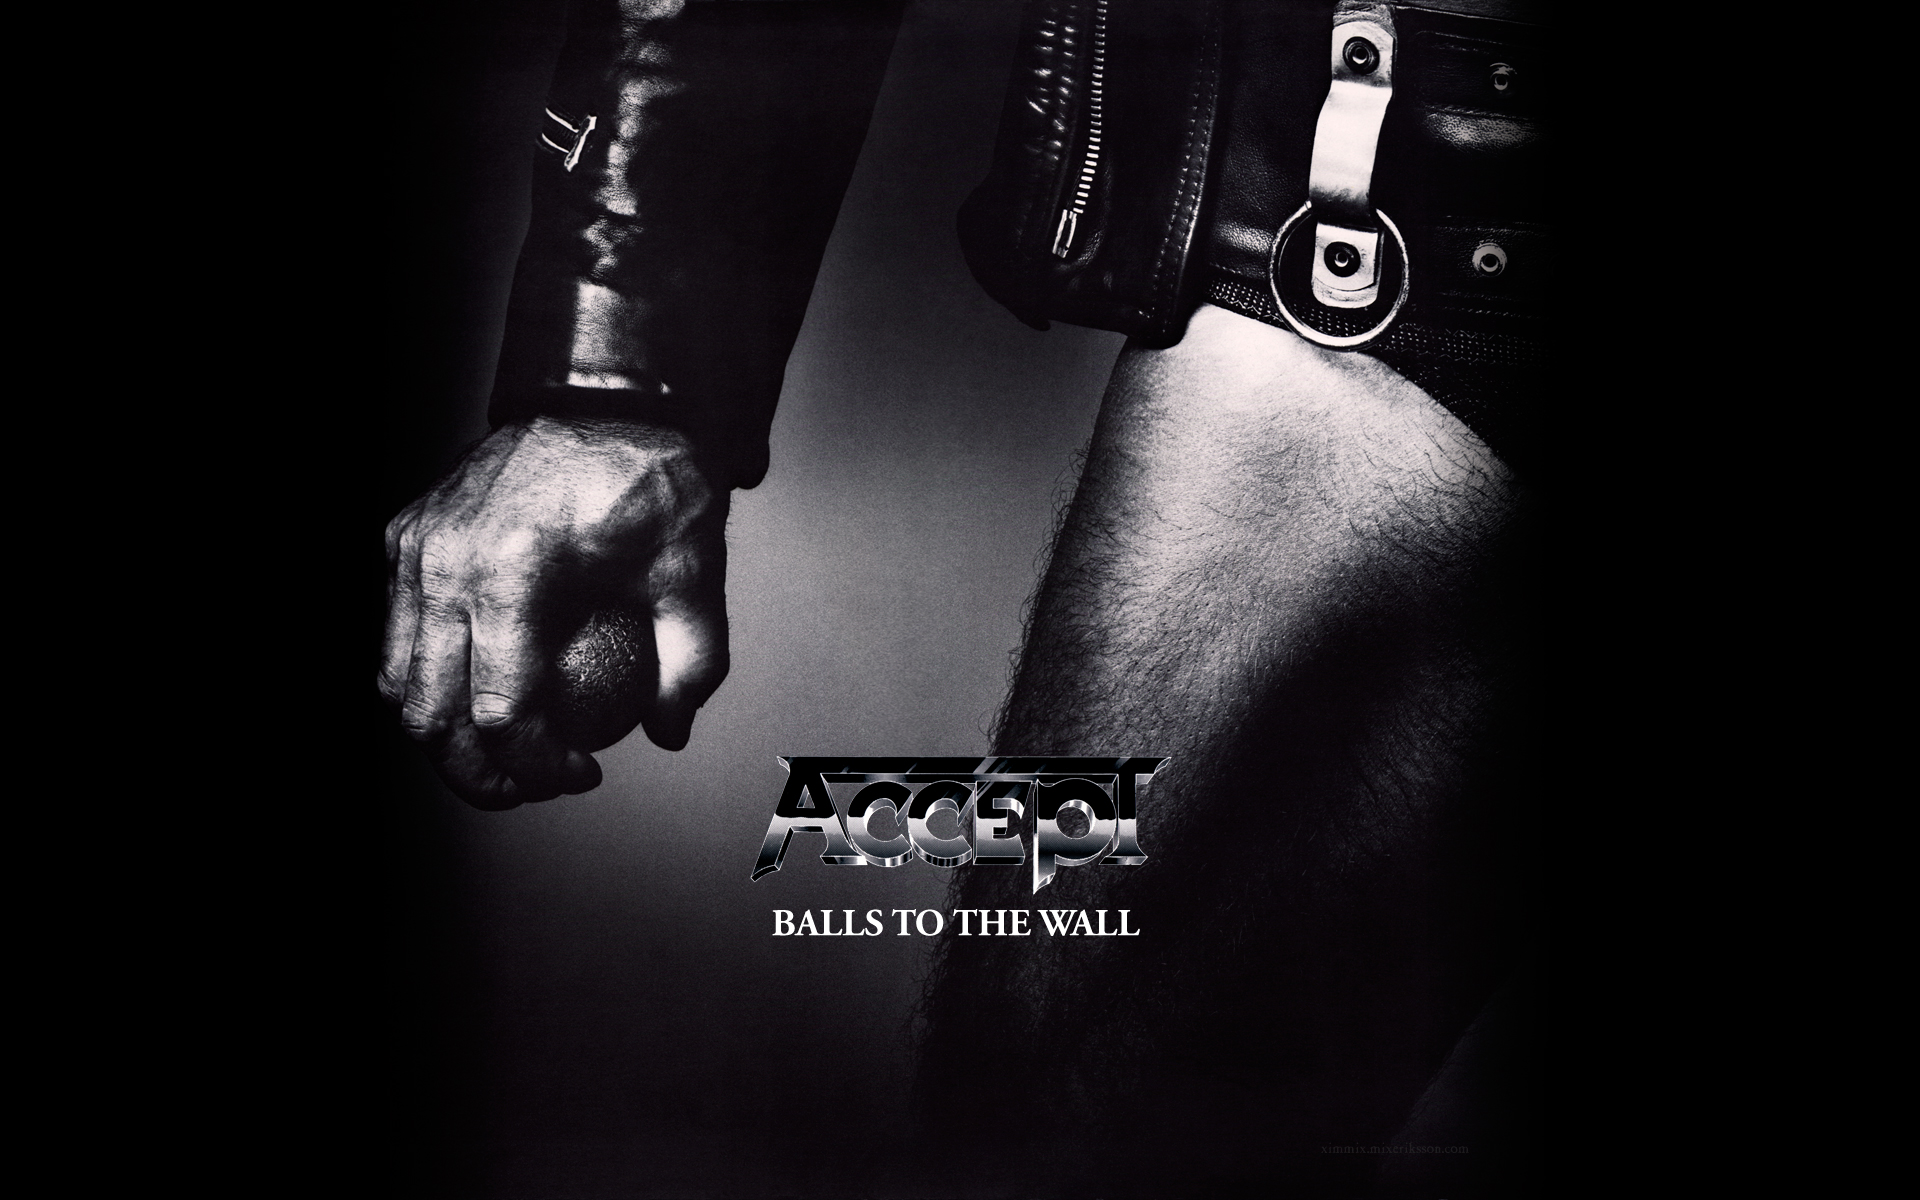 Accept full. Accept balls to the Wall обложка. Accept balls to the Wall 1983. Accept balls to the Wall 1983 обложка. Обложки тяжелого рока.